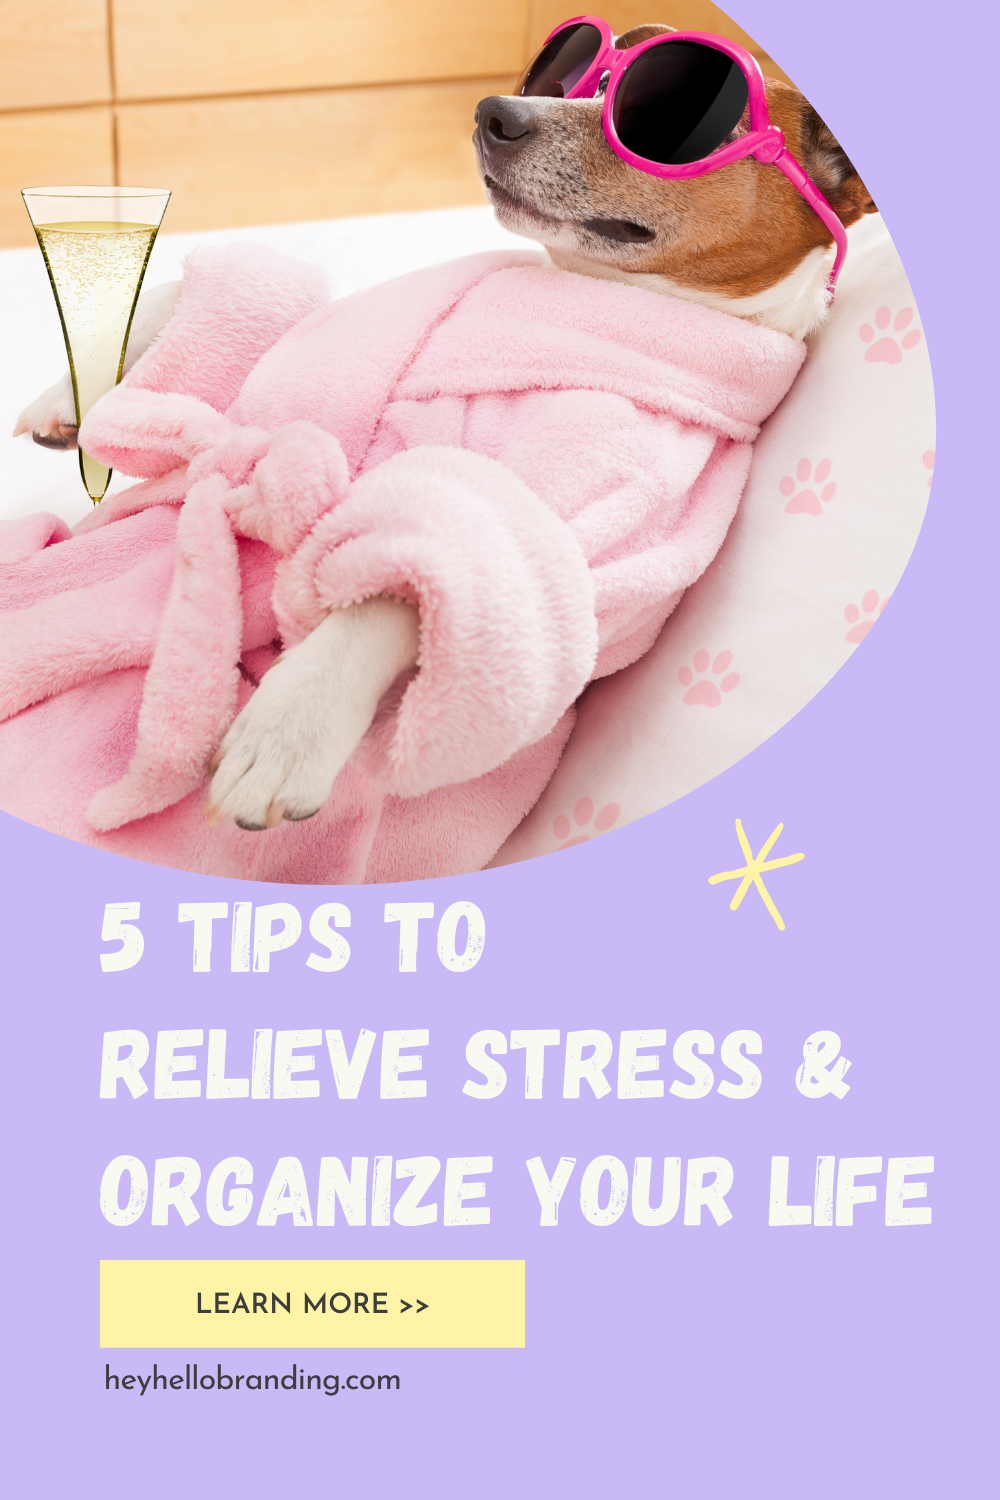 5 Tips to Relieve Stress & Organize Your Life